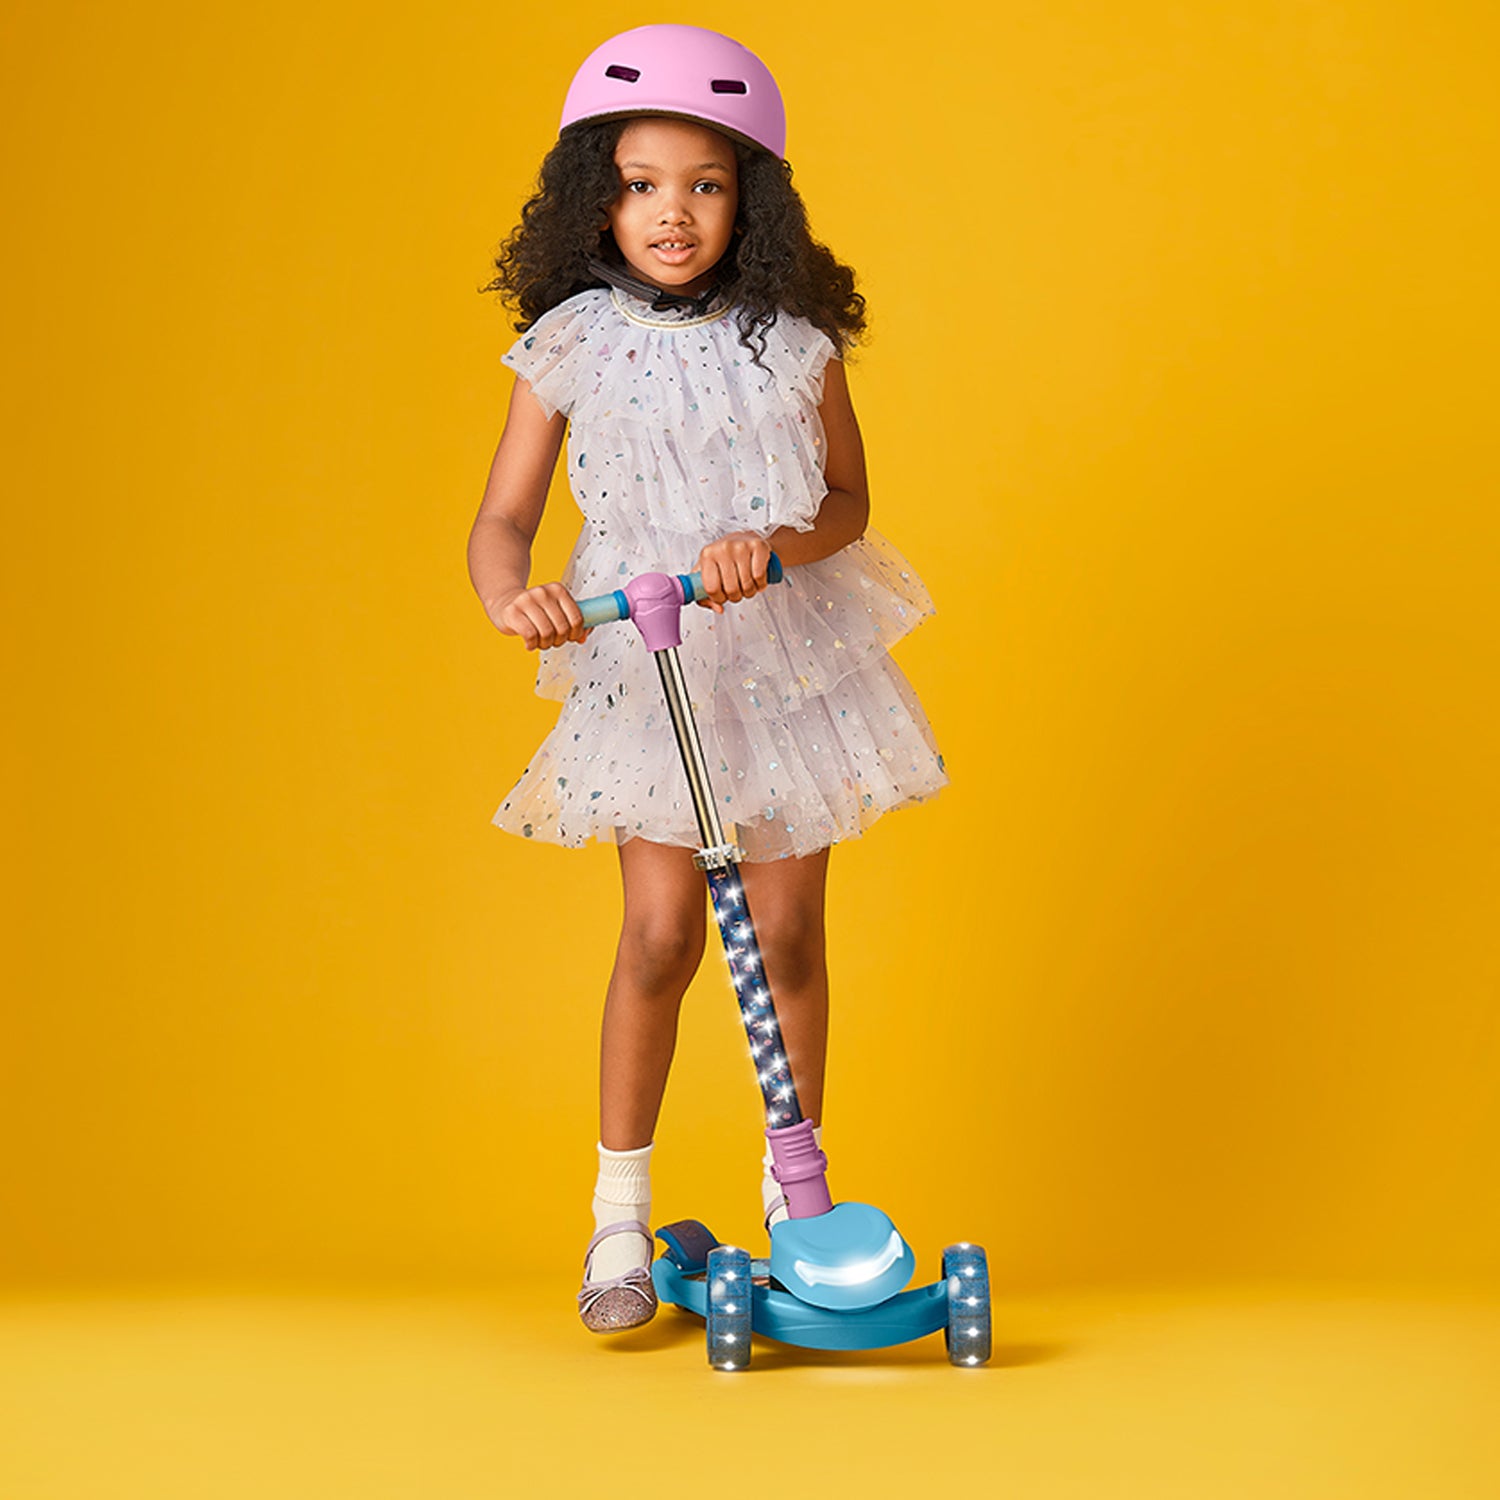 young girl in a helmet standing on frozen kick scooter